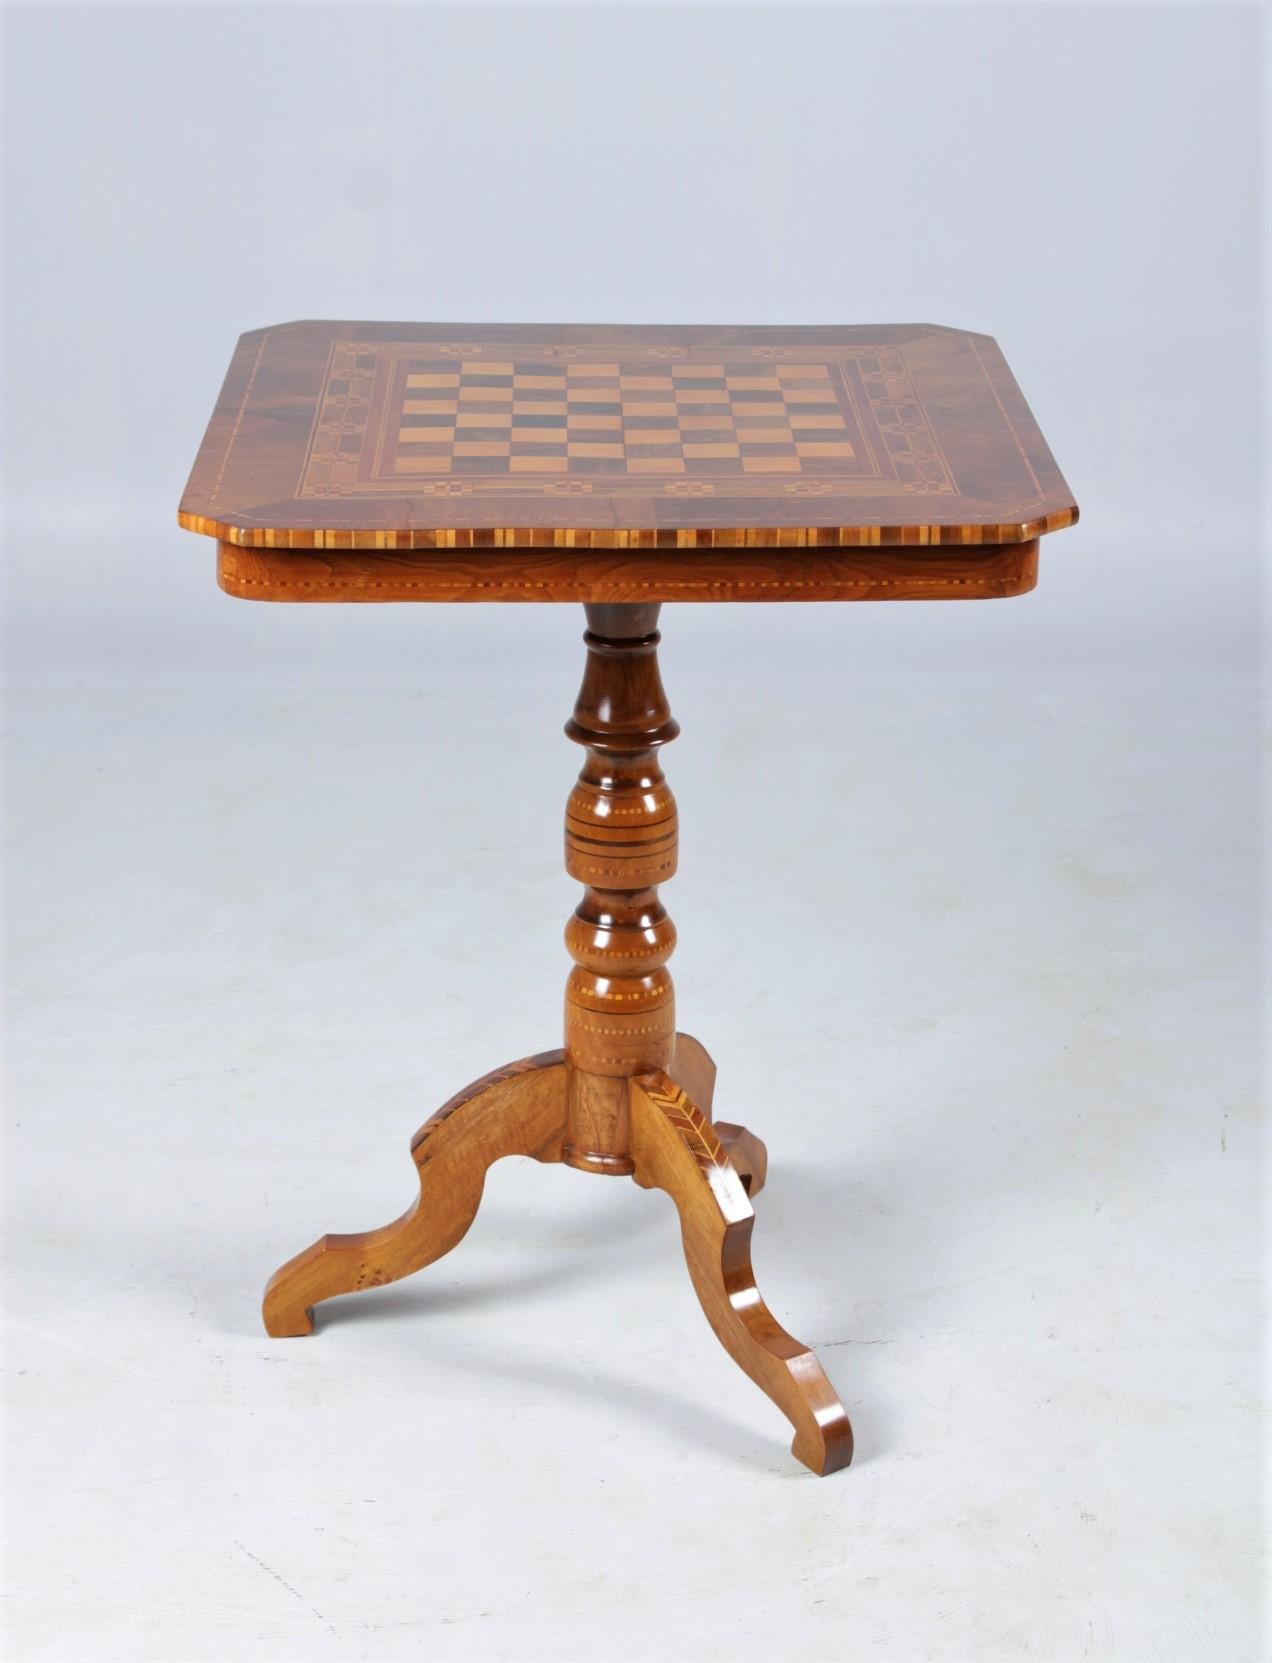 19th century antique chess table without pieces

Italy (Sorrento)
Walnut etc.
Historism around 1850

Dimensions:
H x W x D: 74 cm x 60 cm x 60 cm

Description:
Very richly inlaid and marked piece of furniture.
Tripod base. Curved legs